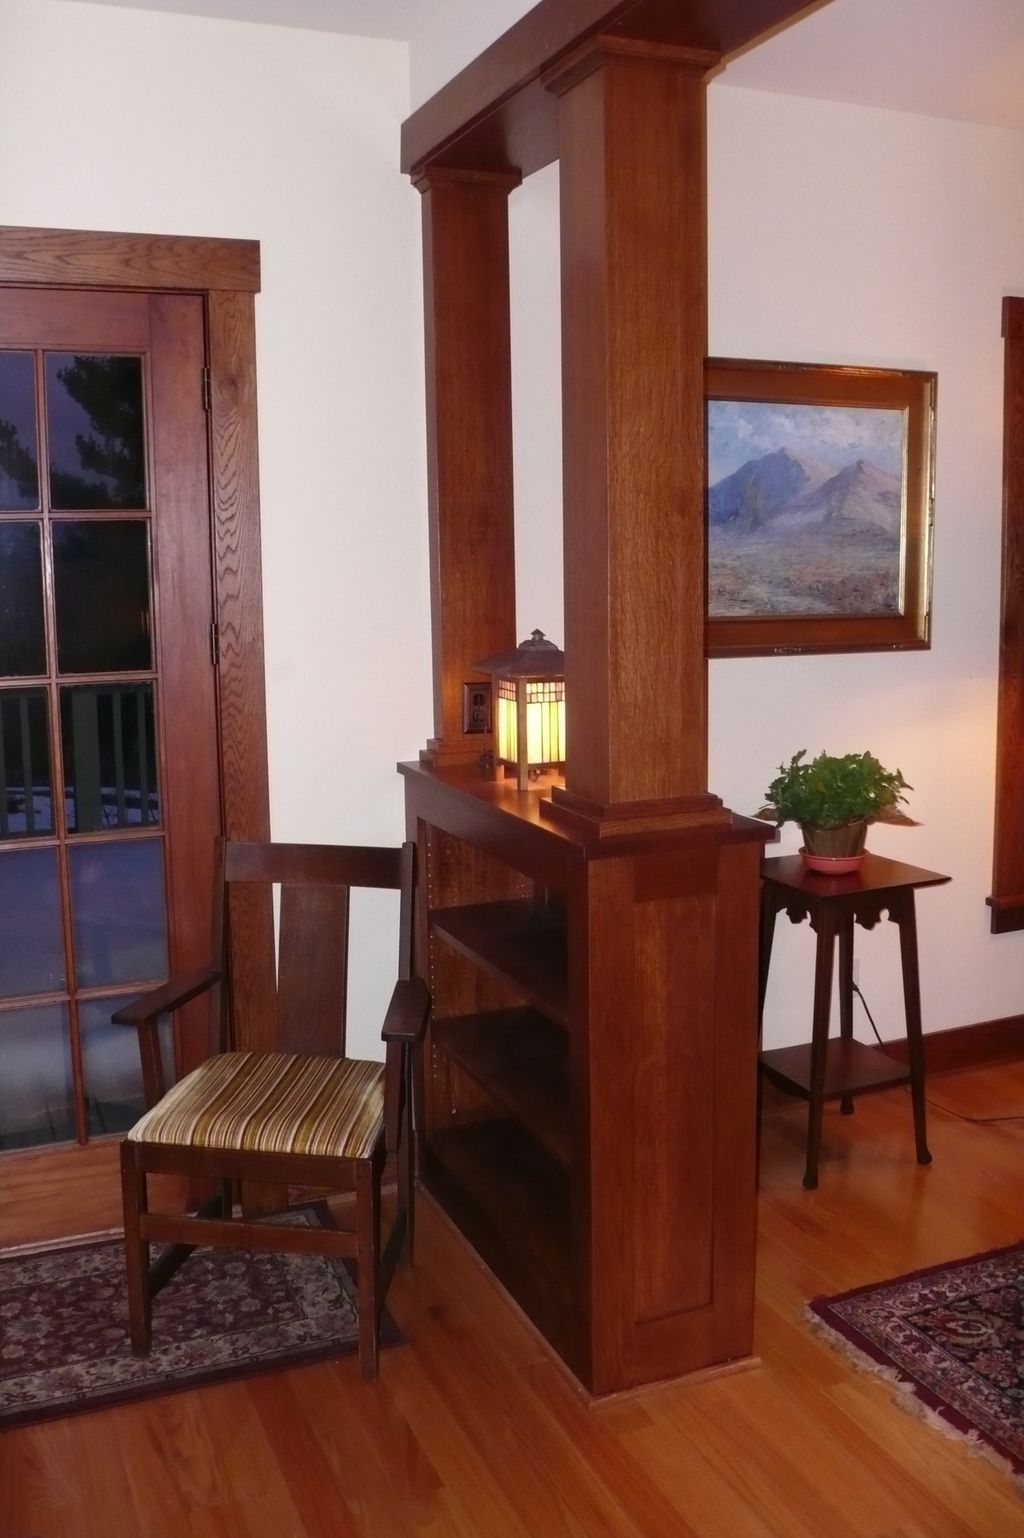 Wooden Cabinet Devider For Living Room And Dining Room (View 1 of 16)